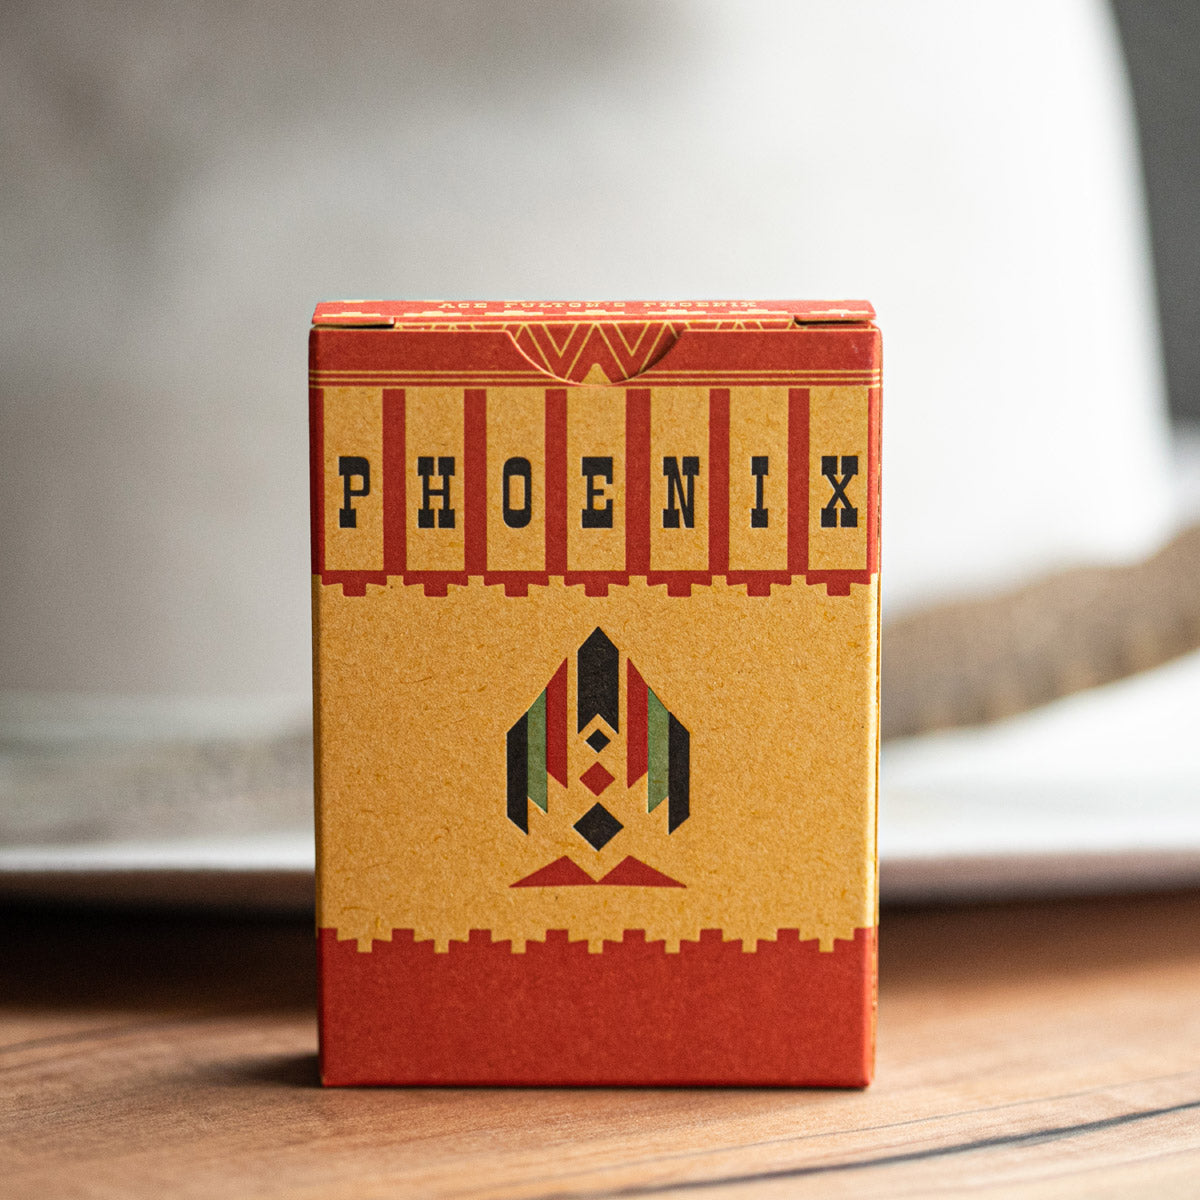 ACE FULTON'S PHOENIX CASINO PLAYING CARDS TOBACCO SUNSET EDITION